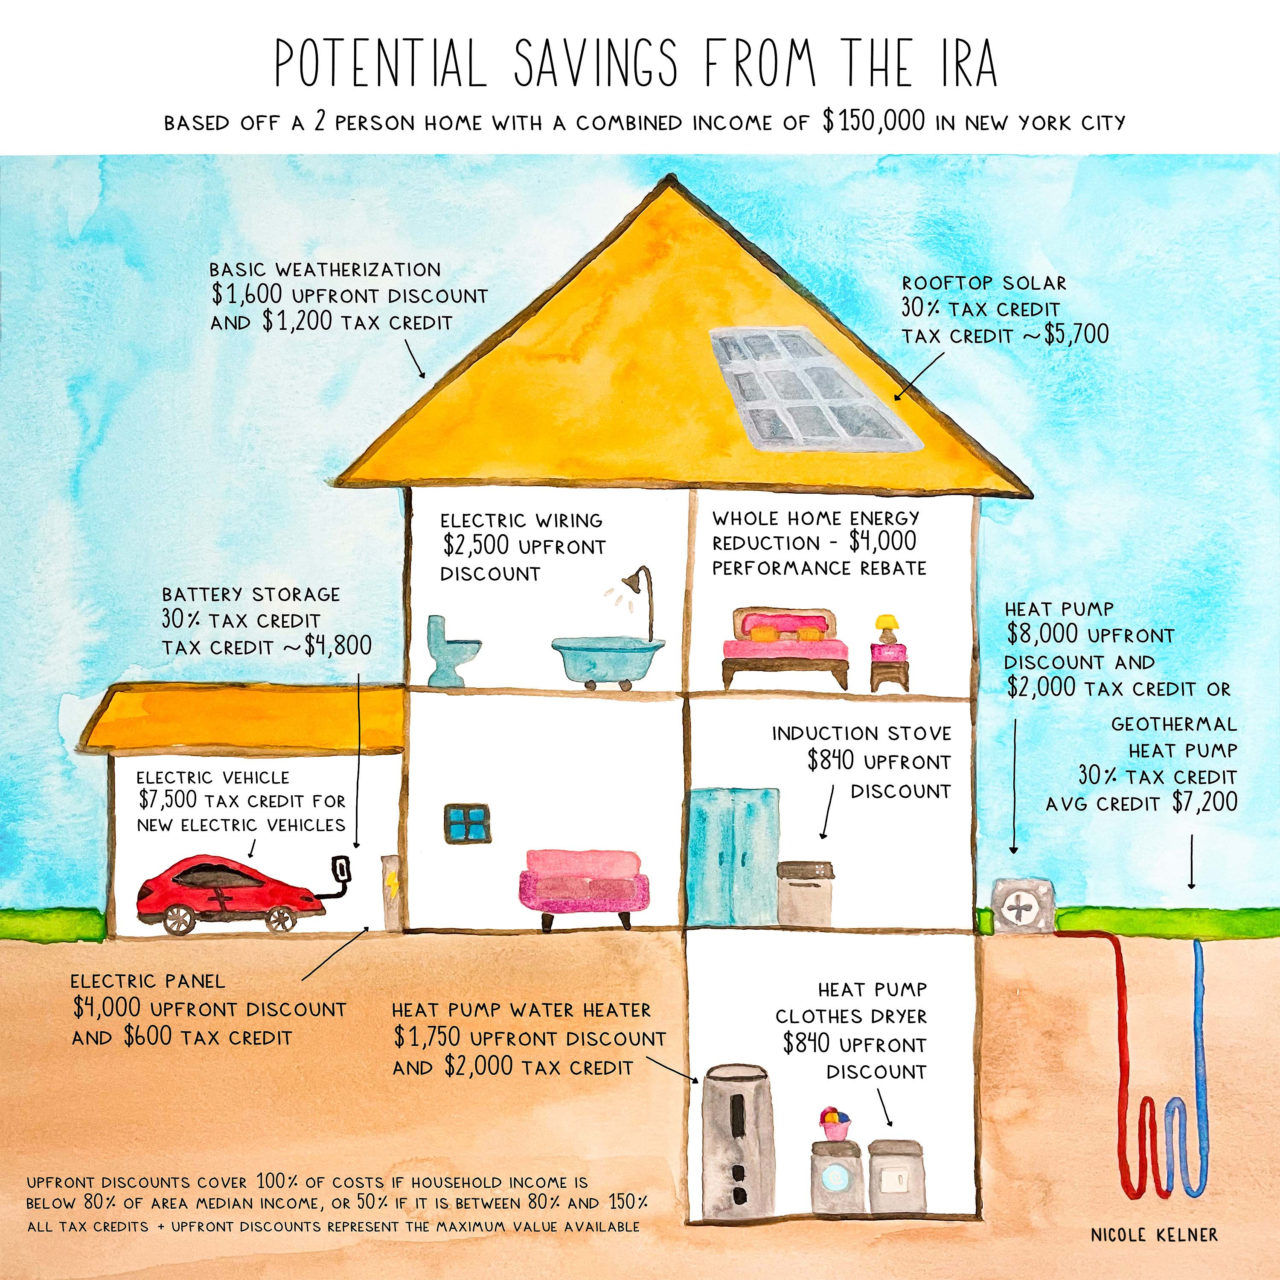 Learn About The IRA s Homeowner Electrification And Efficiency 